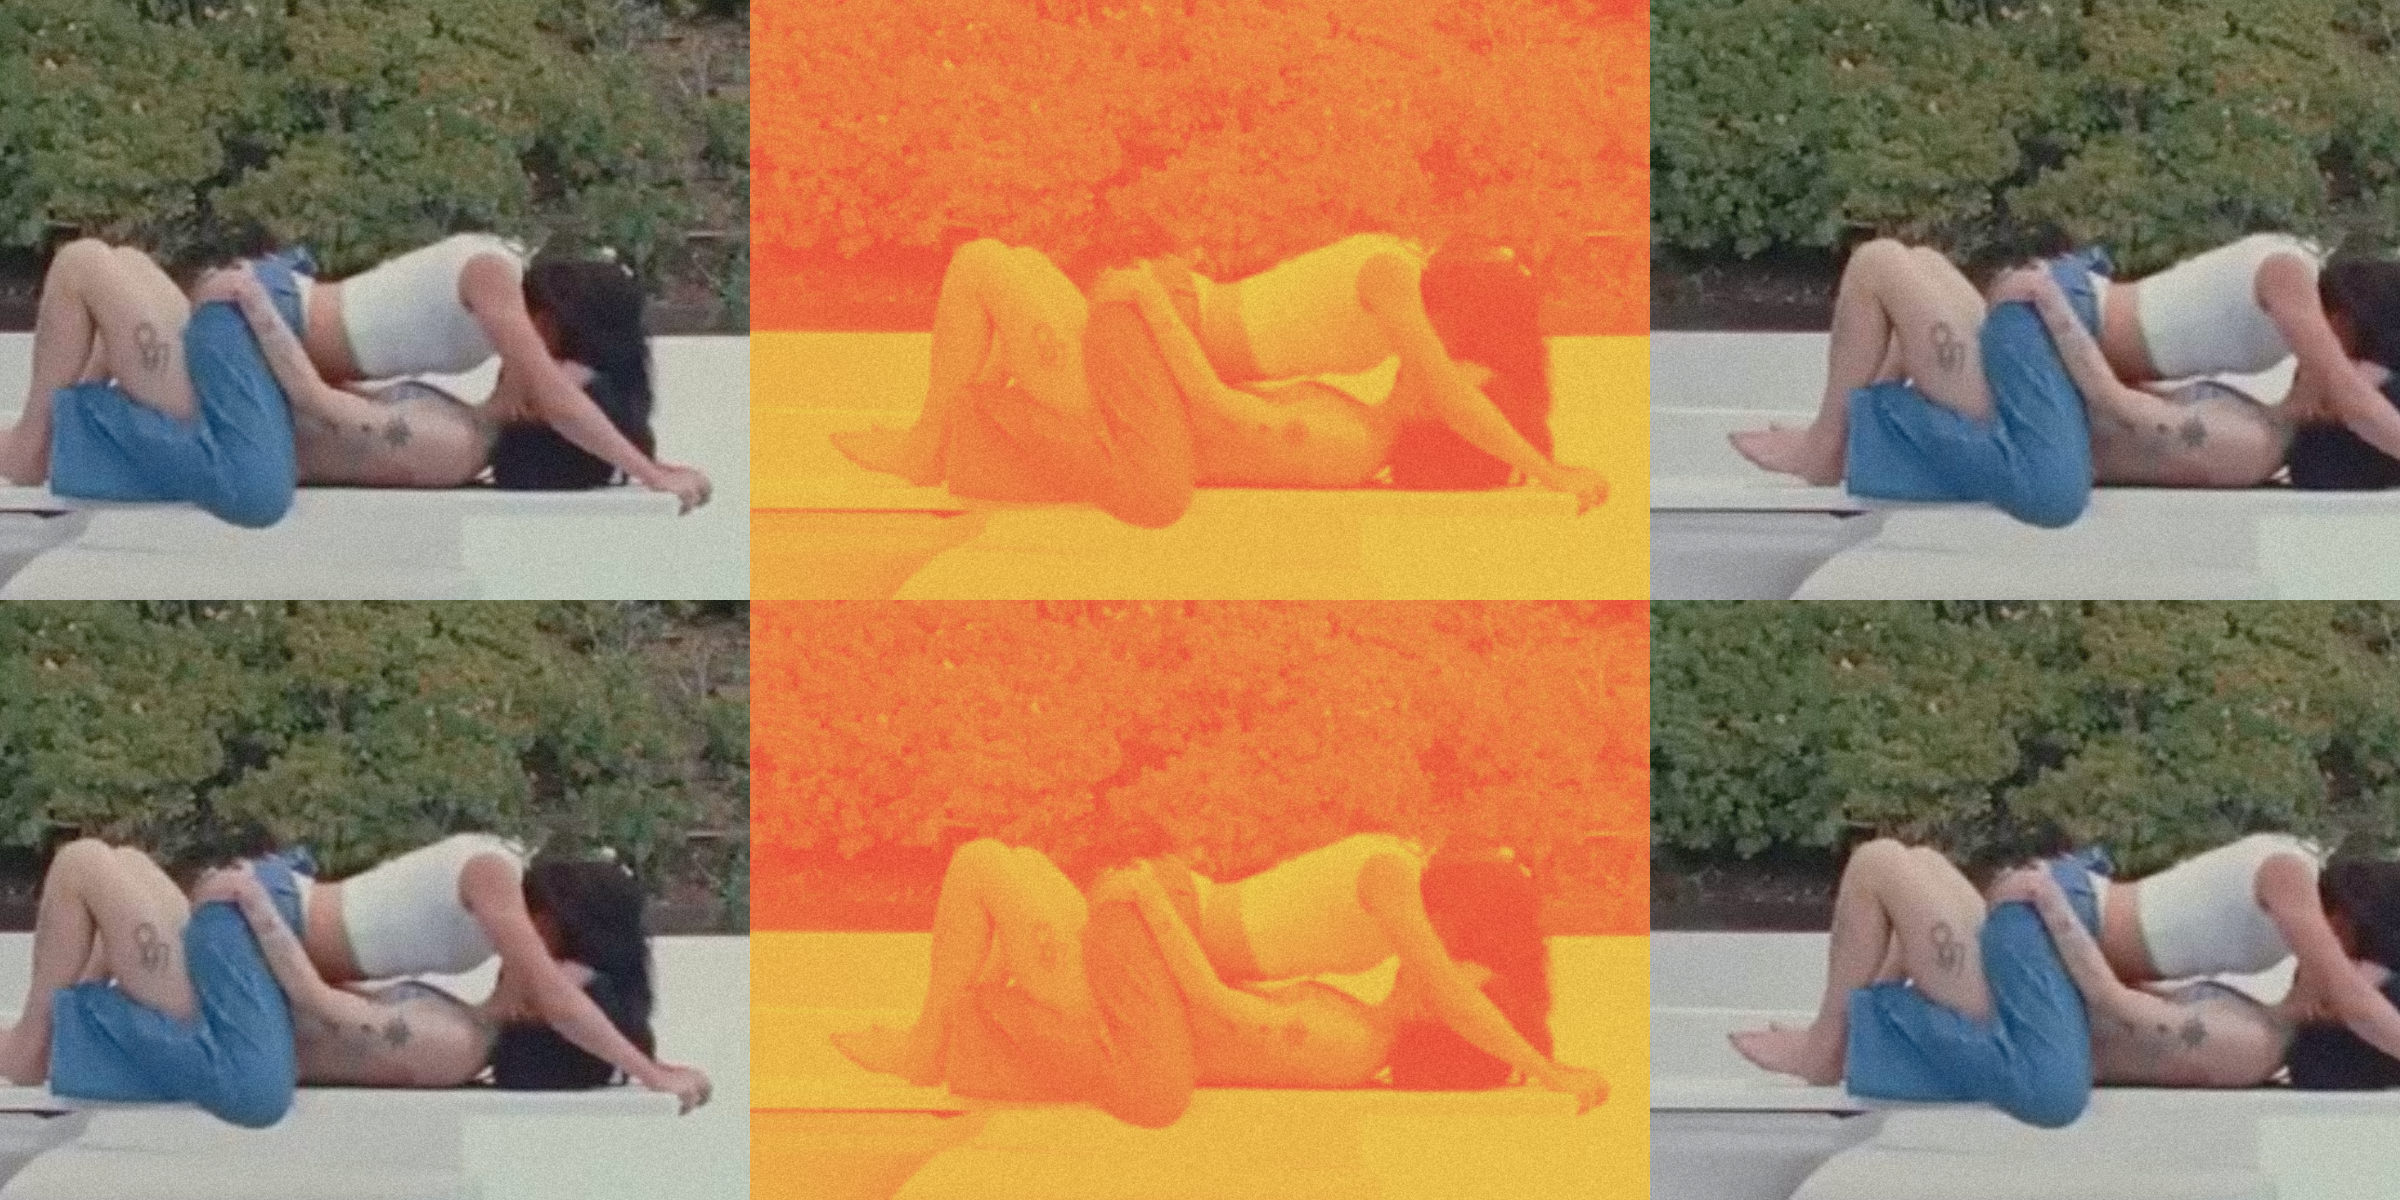 Fletcher Pretending music video: an image of Fletcher kissing a girl lying down on concrete six times with the middle images covered in an orange filter